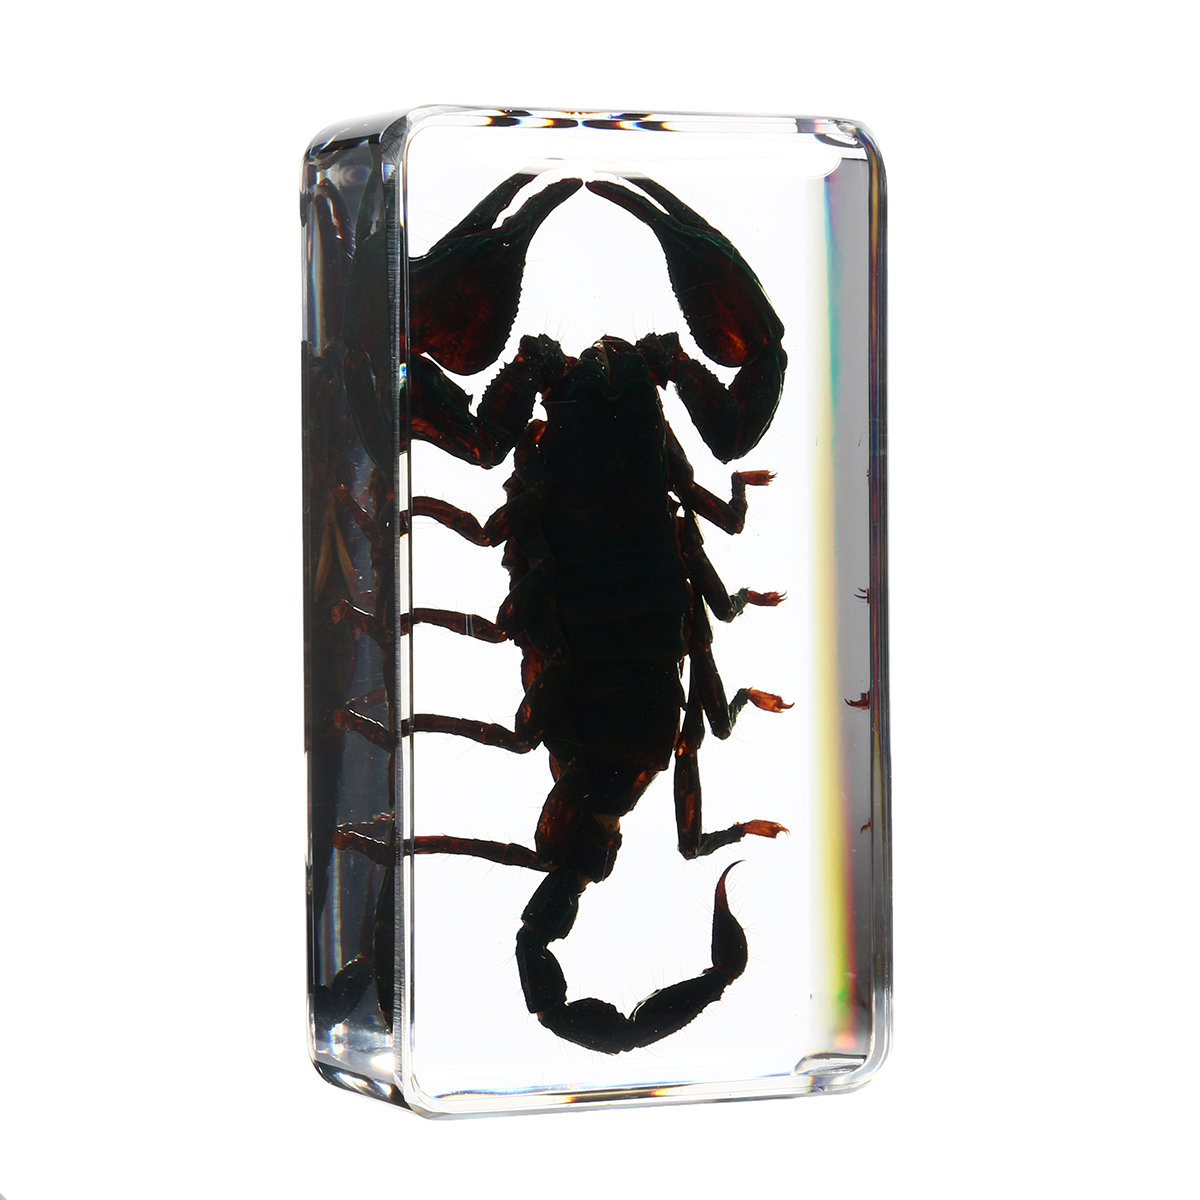 Clear-Acrylic-Lucite-Insect-Specimen-Spider-Black-Longhorn-Beetle-Scorpions-Craft-Science-Toy-1328098-1